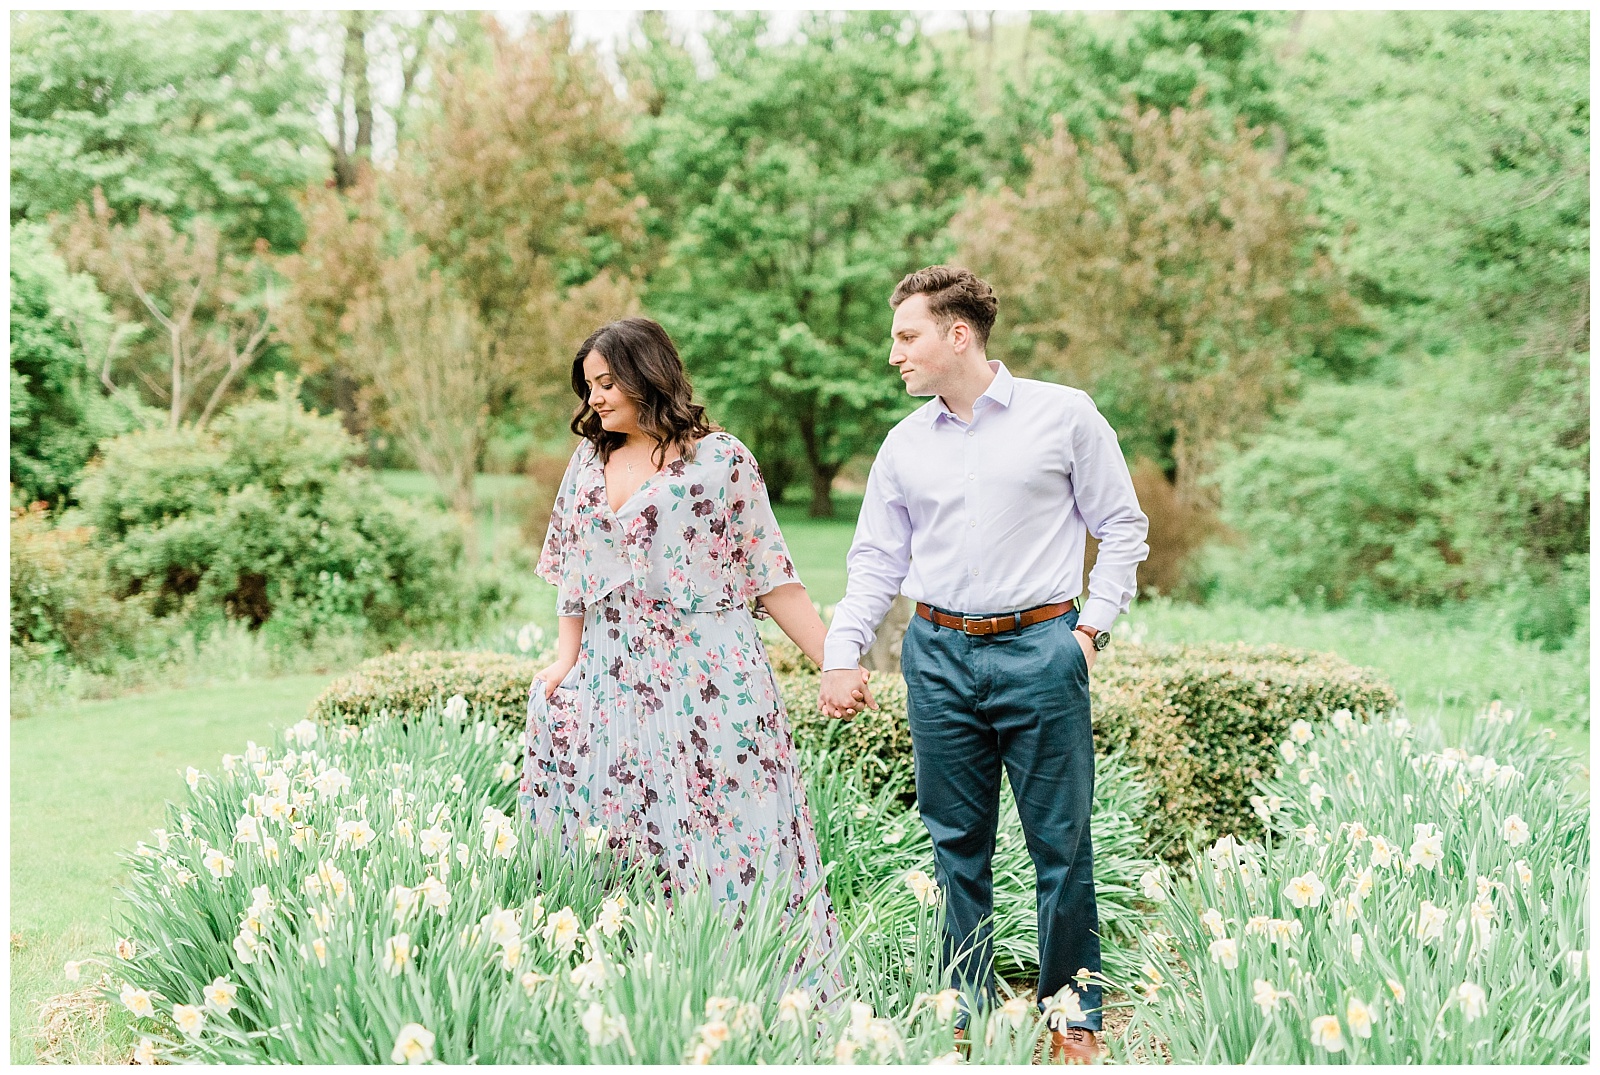 A woman leads a man through a field of blooming flowers.